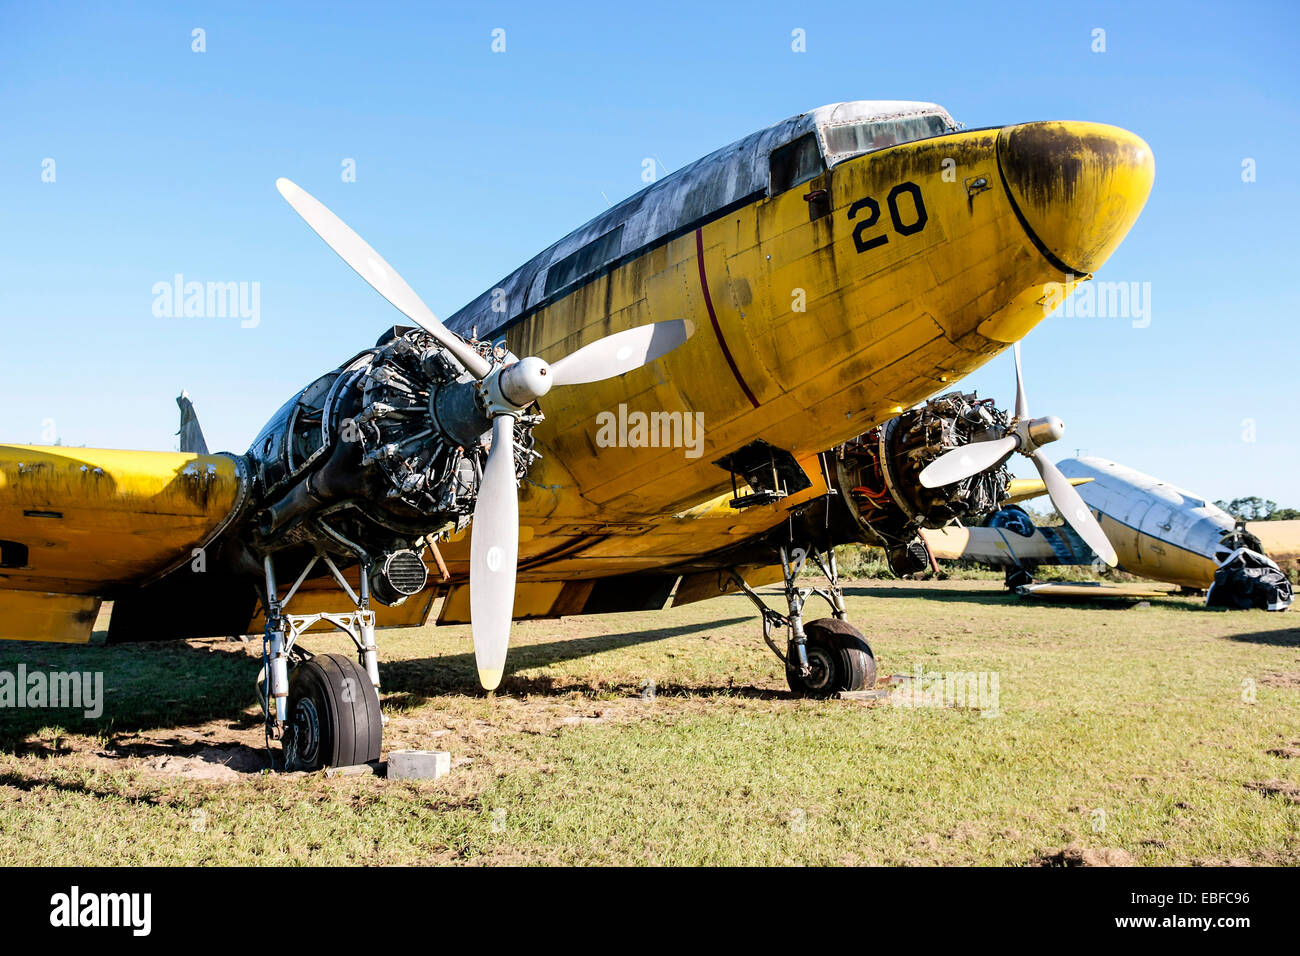 An old yellow painted Douglas DC-3 awaiting restoration or scrapping at an aviation junkyard in Florida Stock Photo